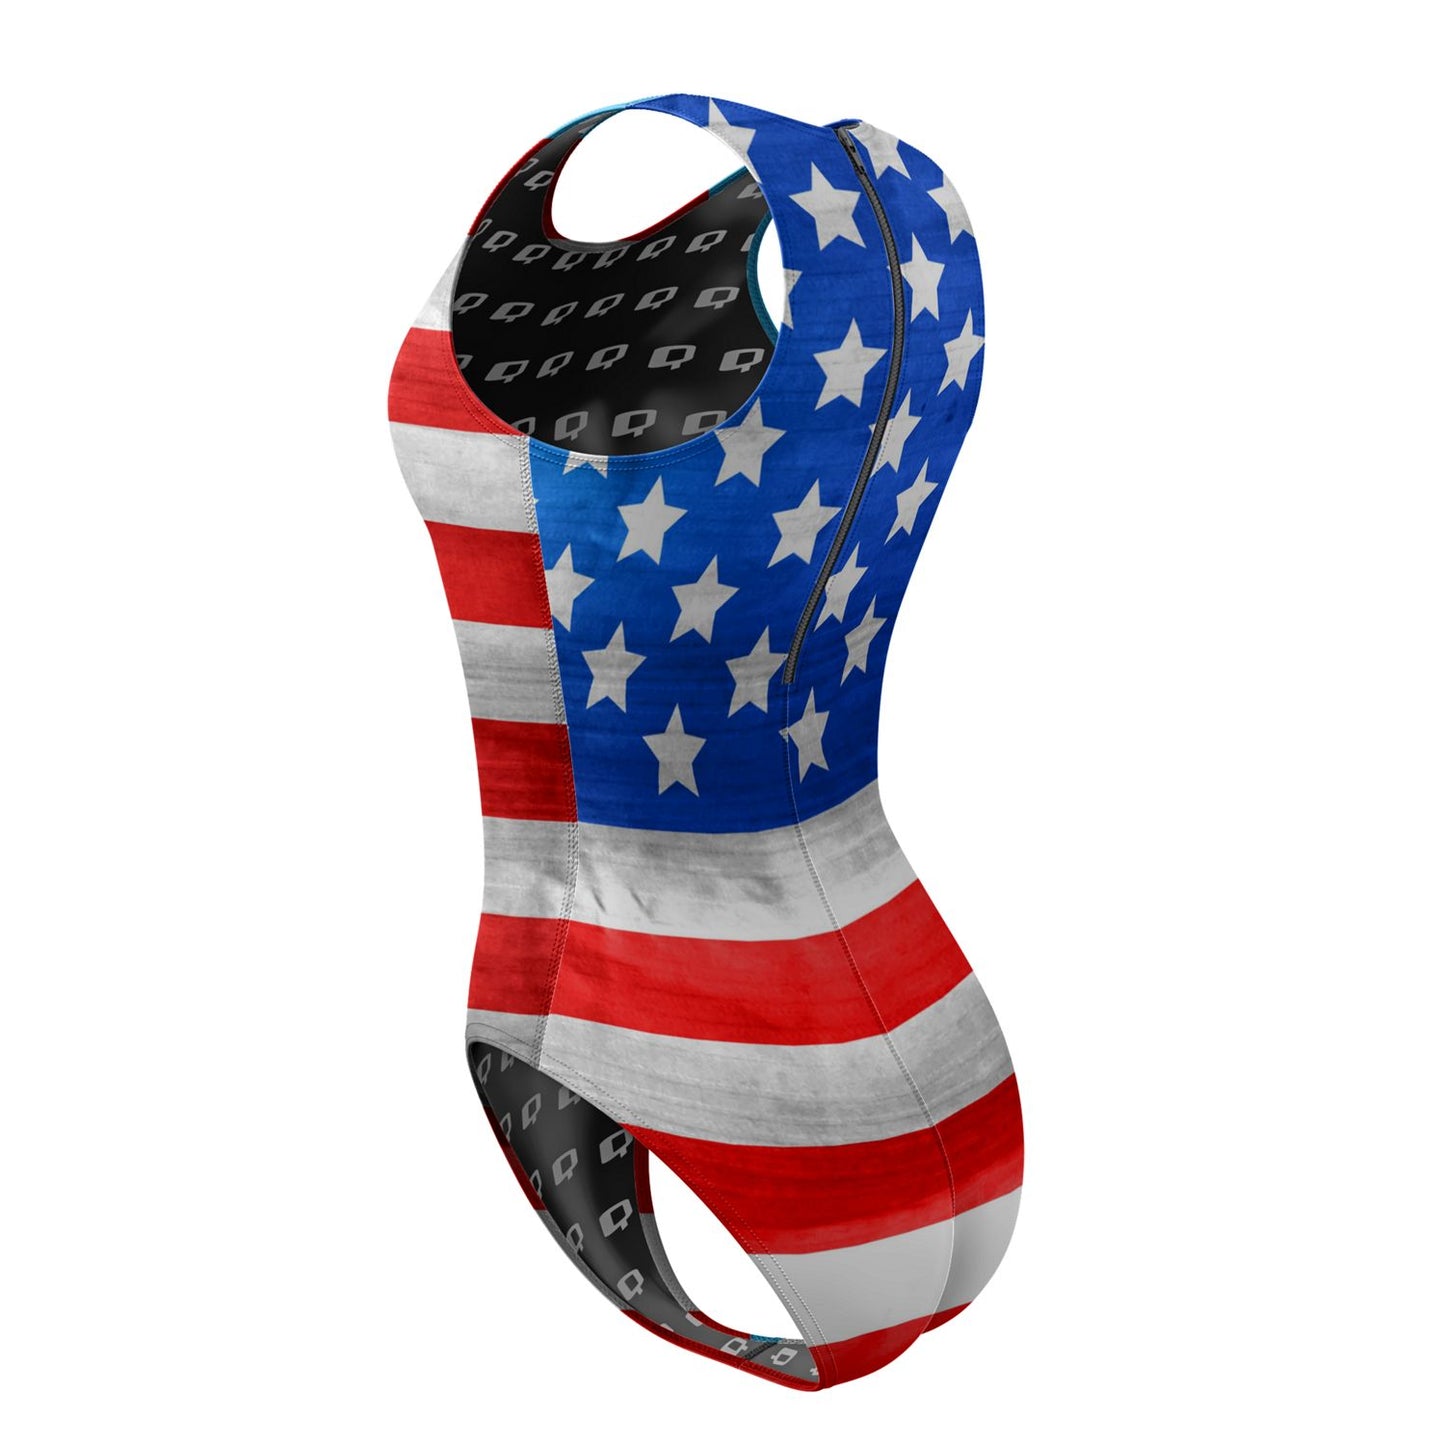 US Of A - Women Waterpolo Swimsuit Classic Cut